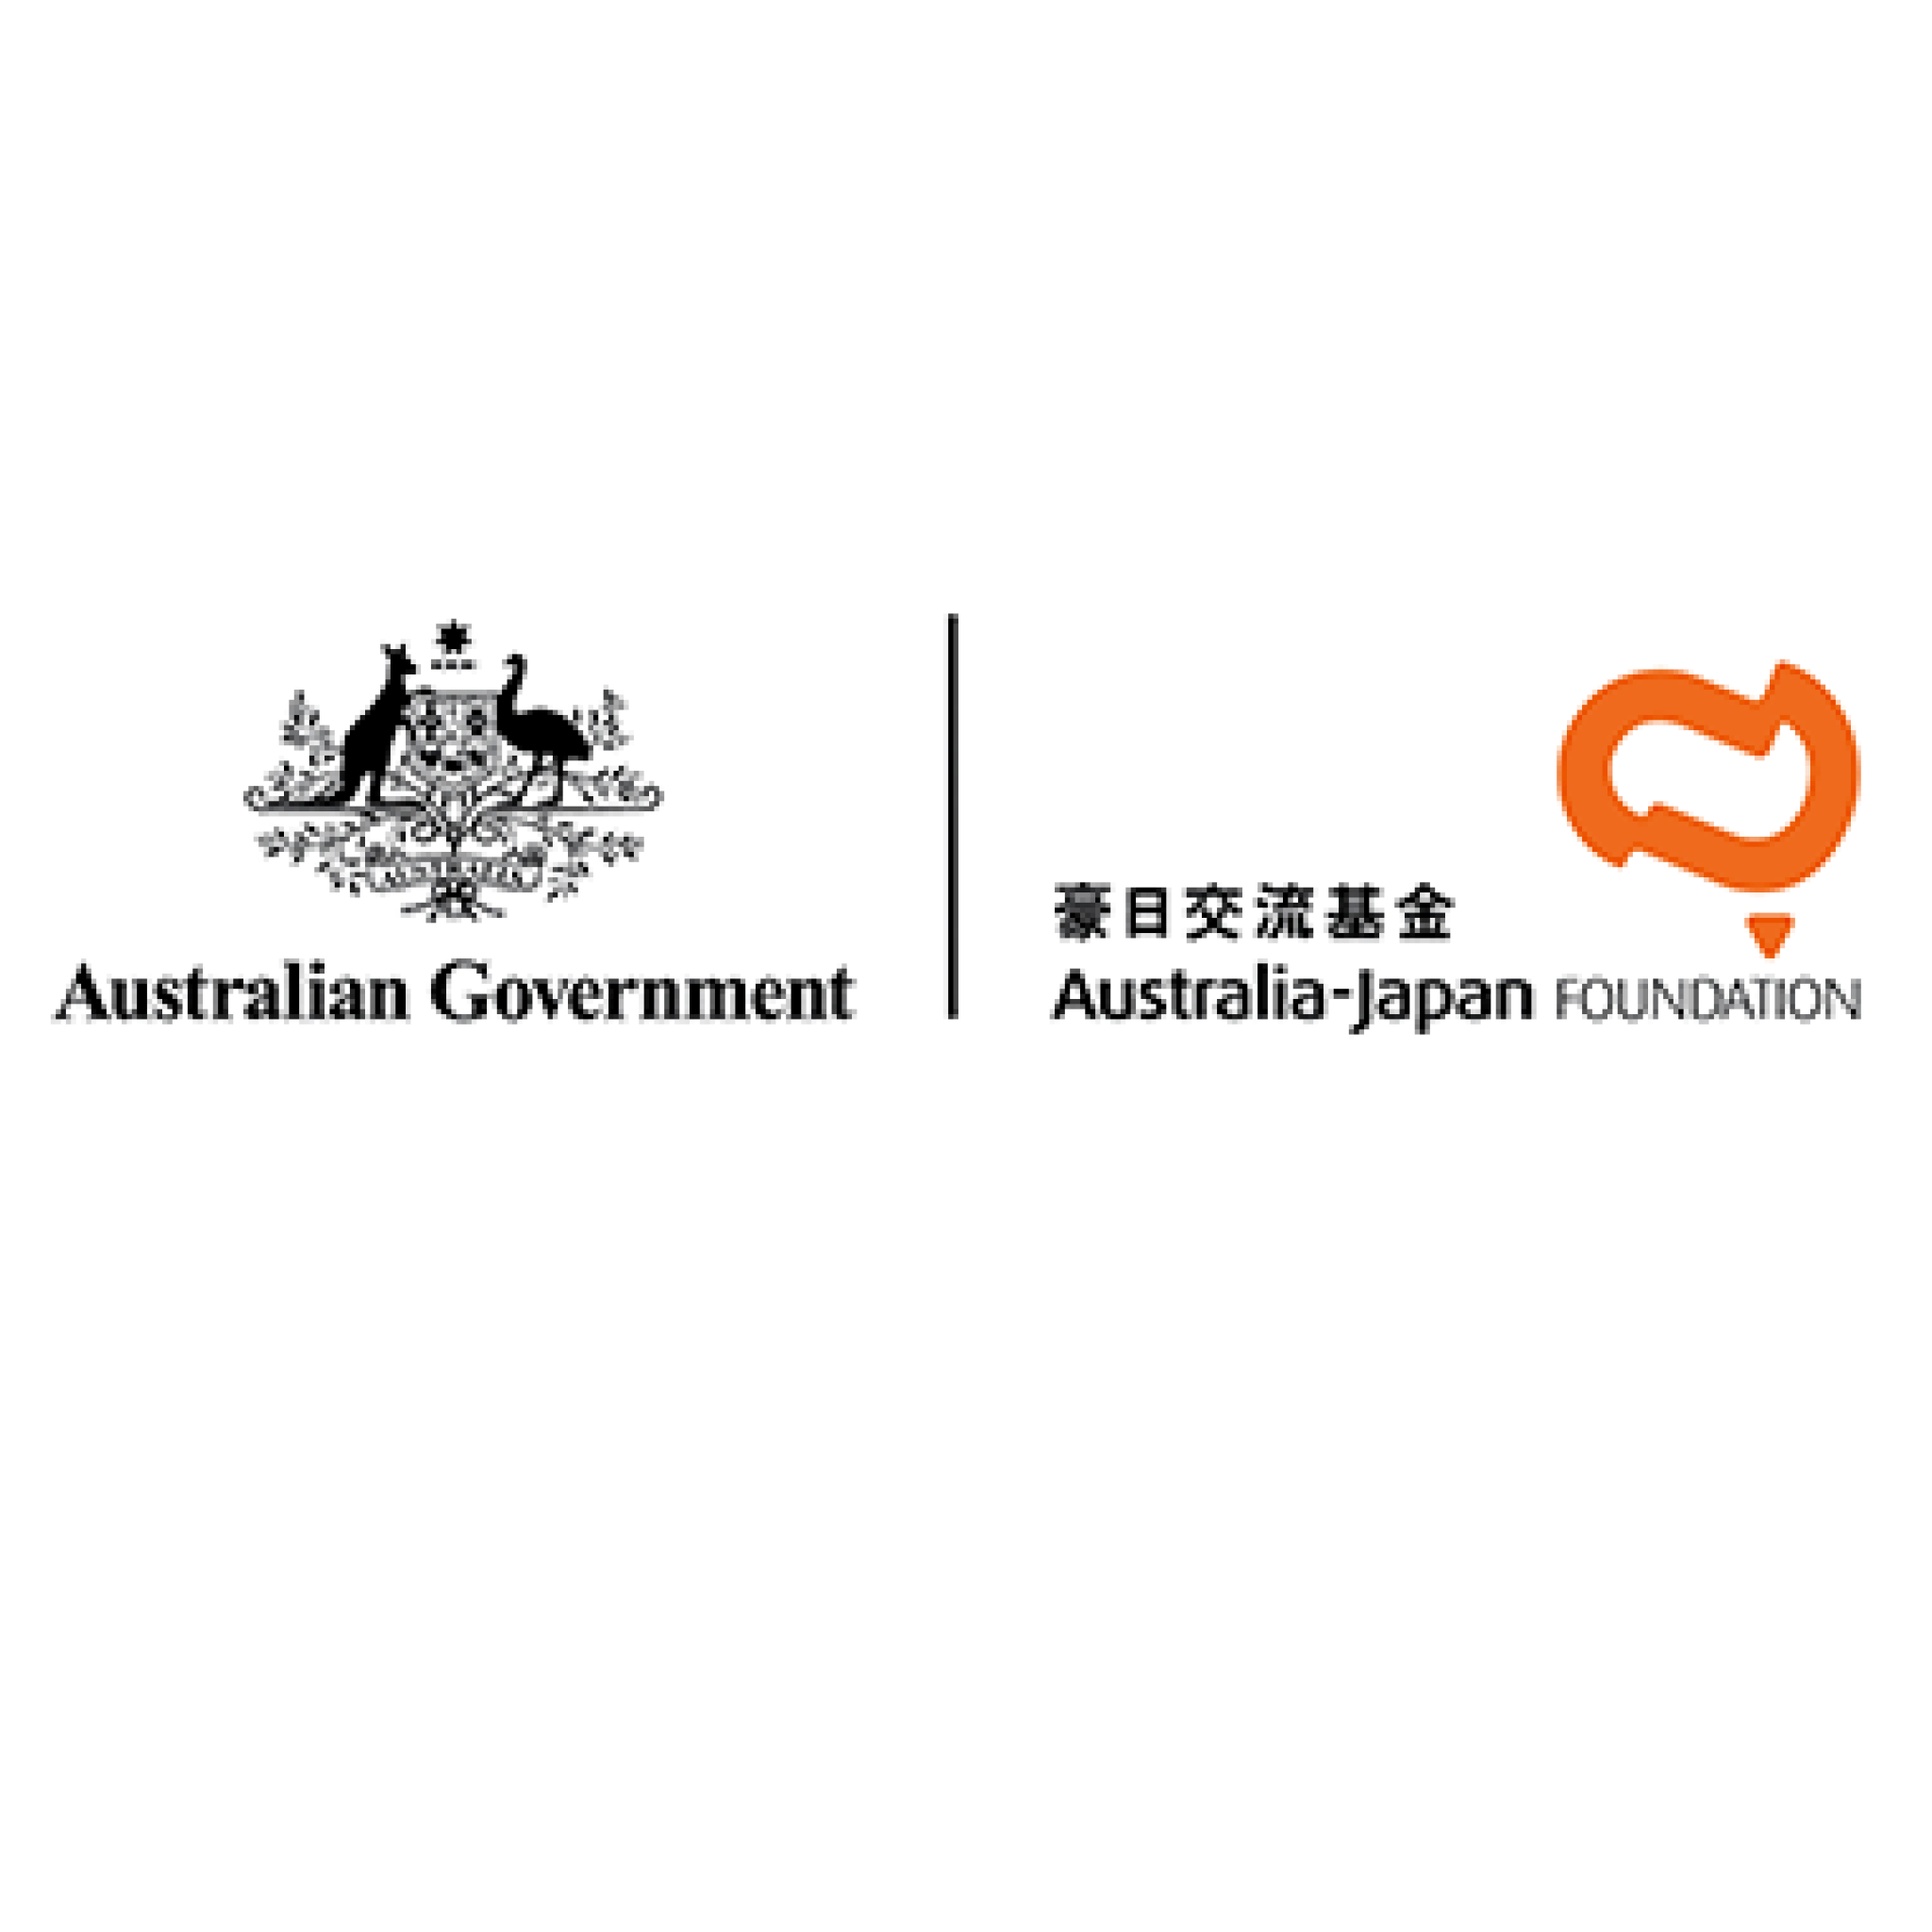 Australia-Japan Foundation of the Department of Foreign Affairs and Trade.